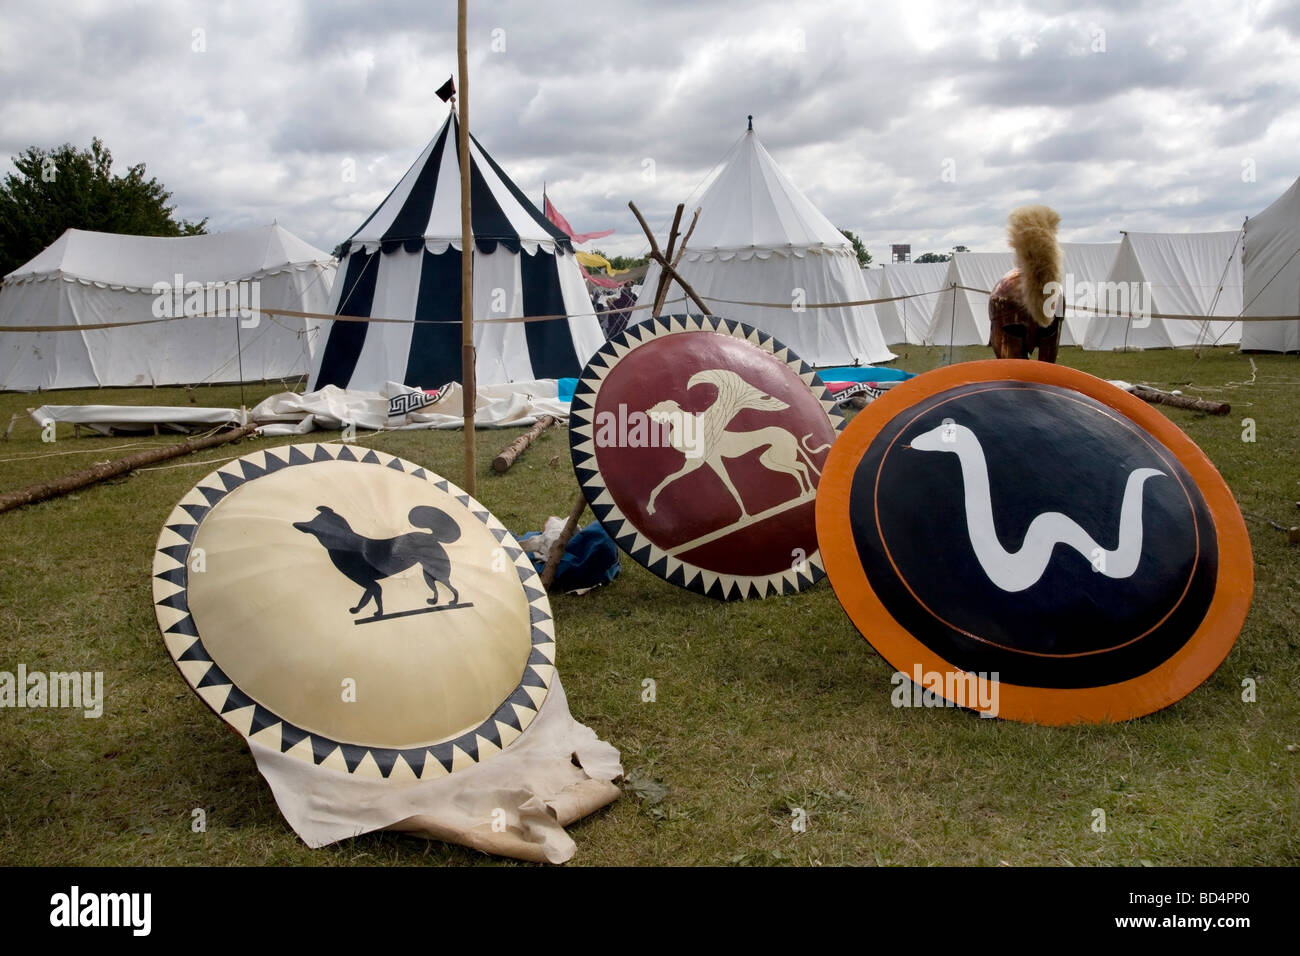 Three Roman shields on display at the Colchester Military Festival in Colchester, Essex, England Stock Photo